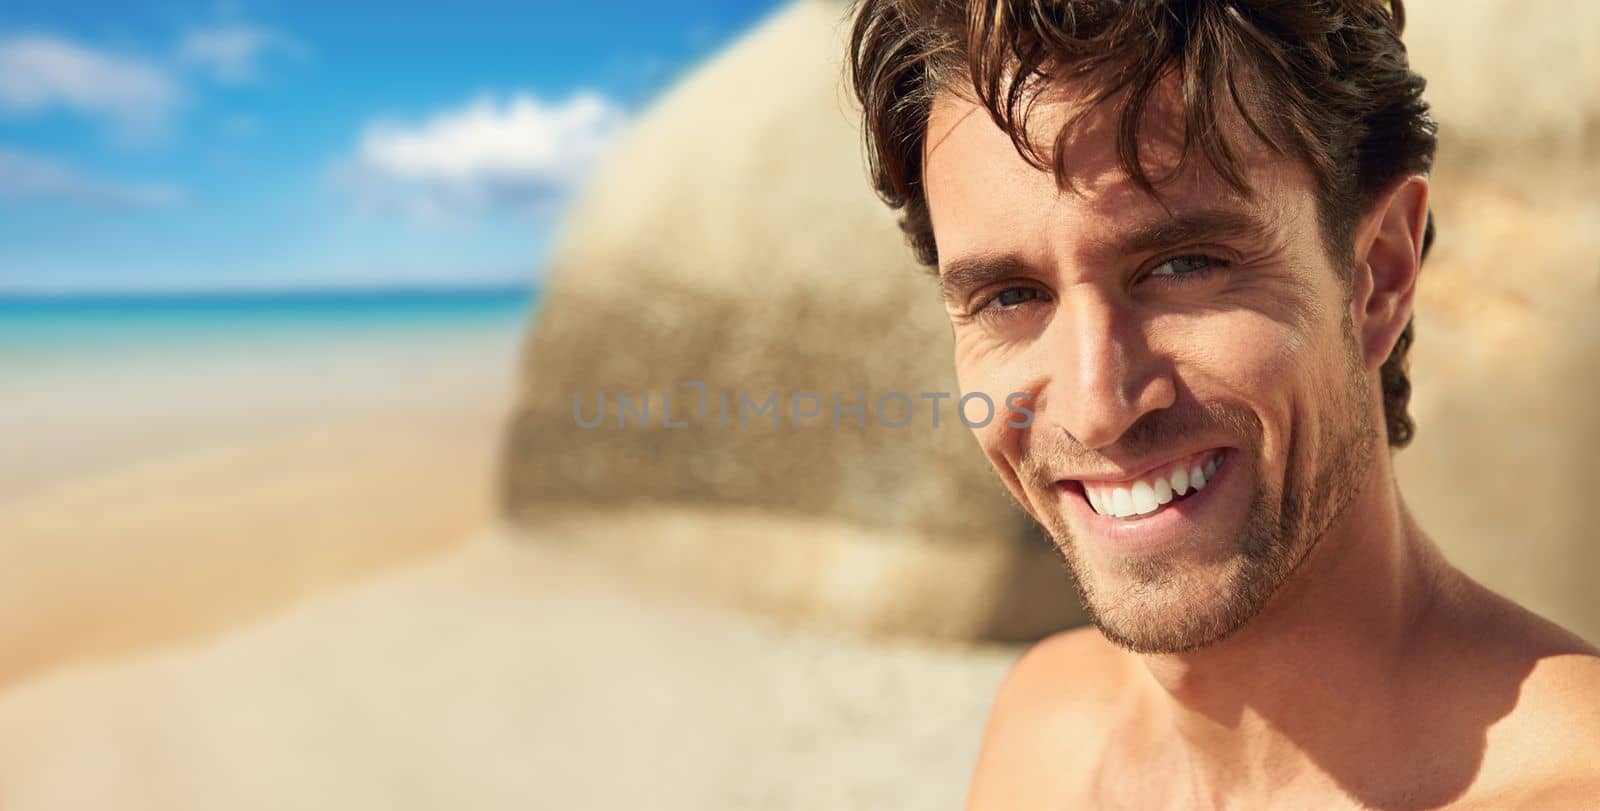 The beach is his happy place. Cropped portrait of a handsome man on a tropical beach